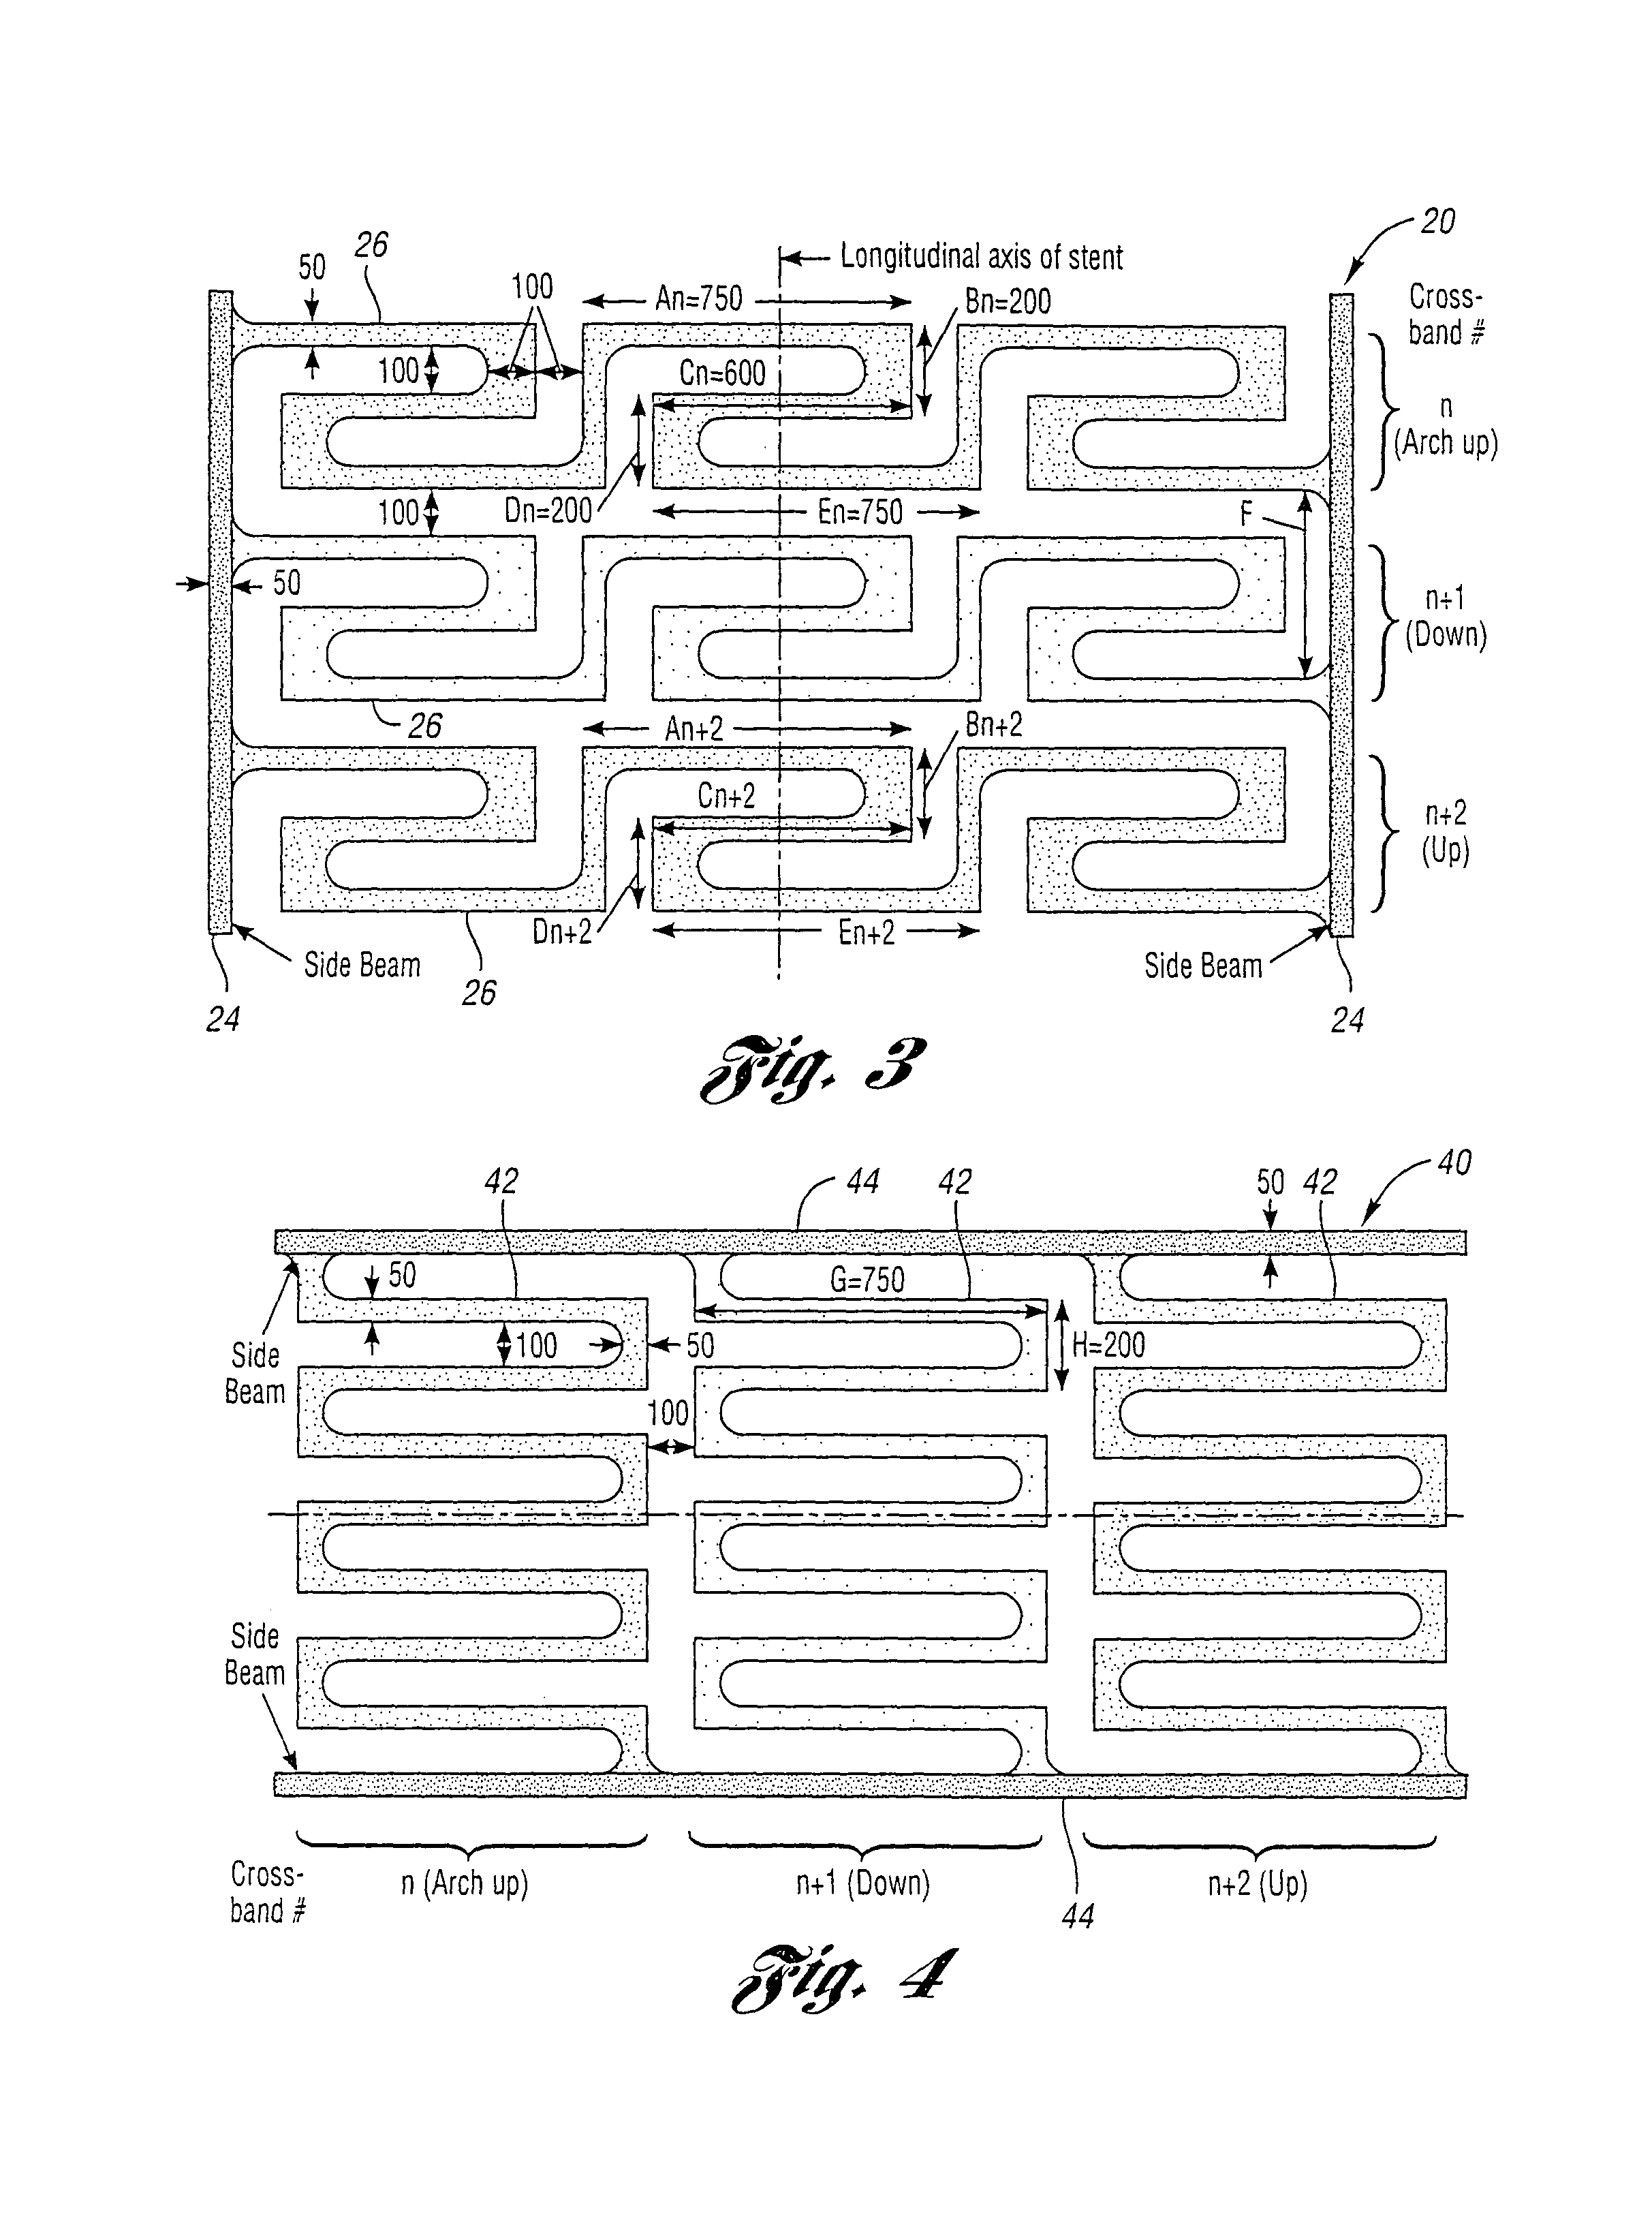 Assembly and planar structure for use therein which is expandable into a 3-D structure such as a stent and device for making the planar structure